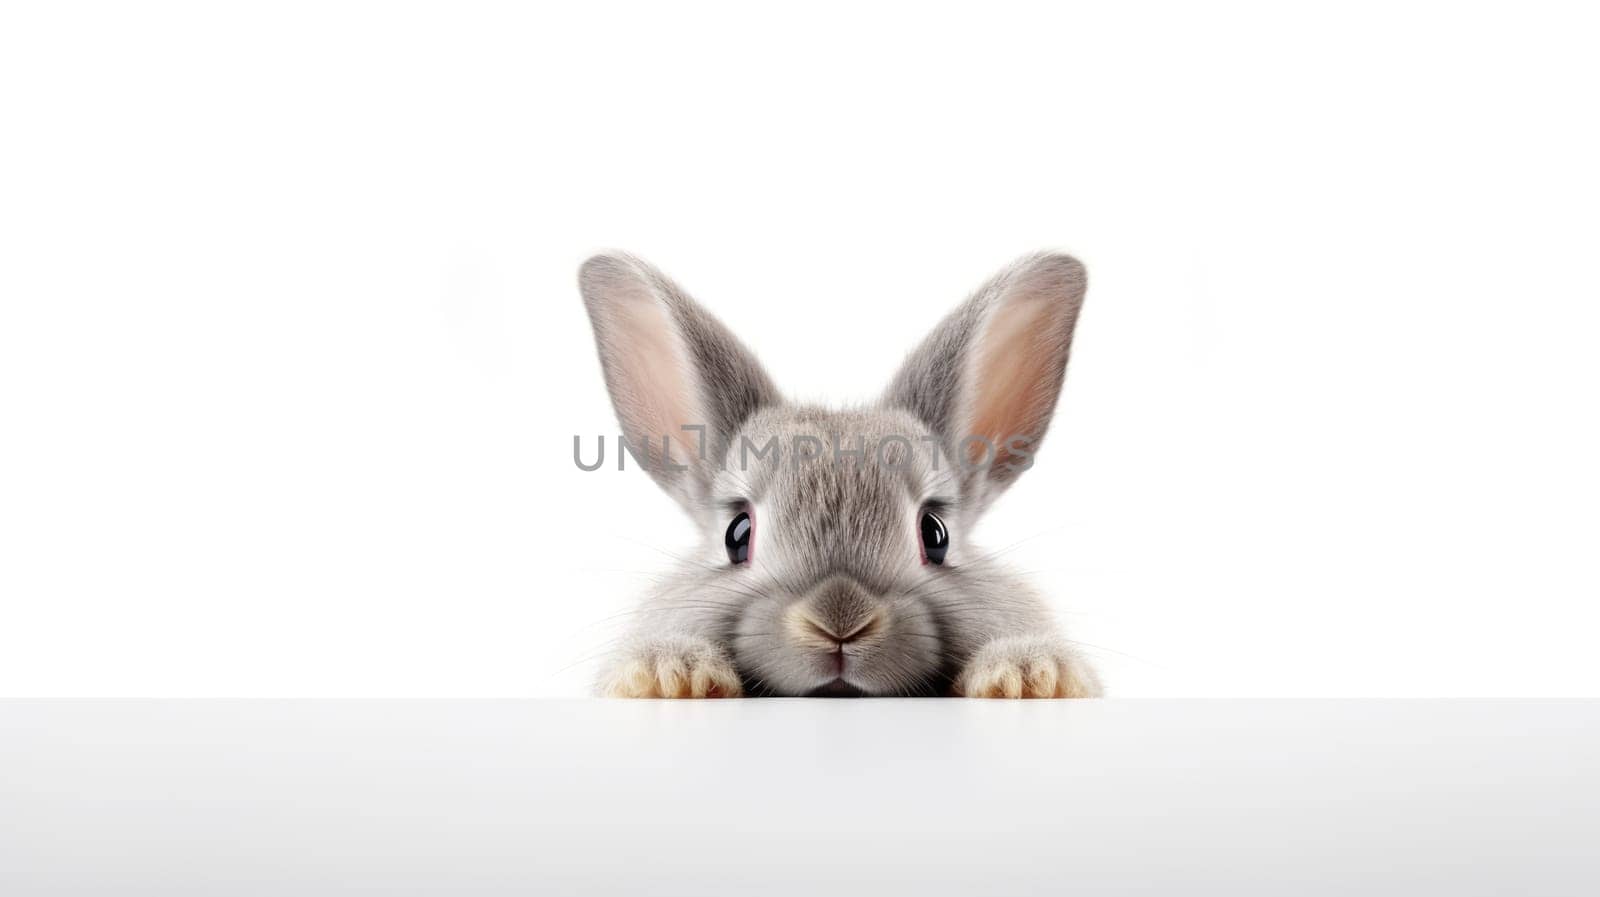 Surprised Funny Cute Bunny with Big Eyes hiding behind white banner on Light Background, Cute Animal Portrait by JuliaDorian